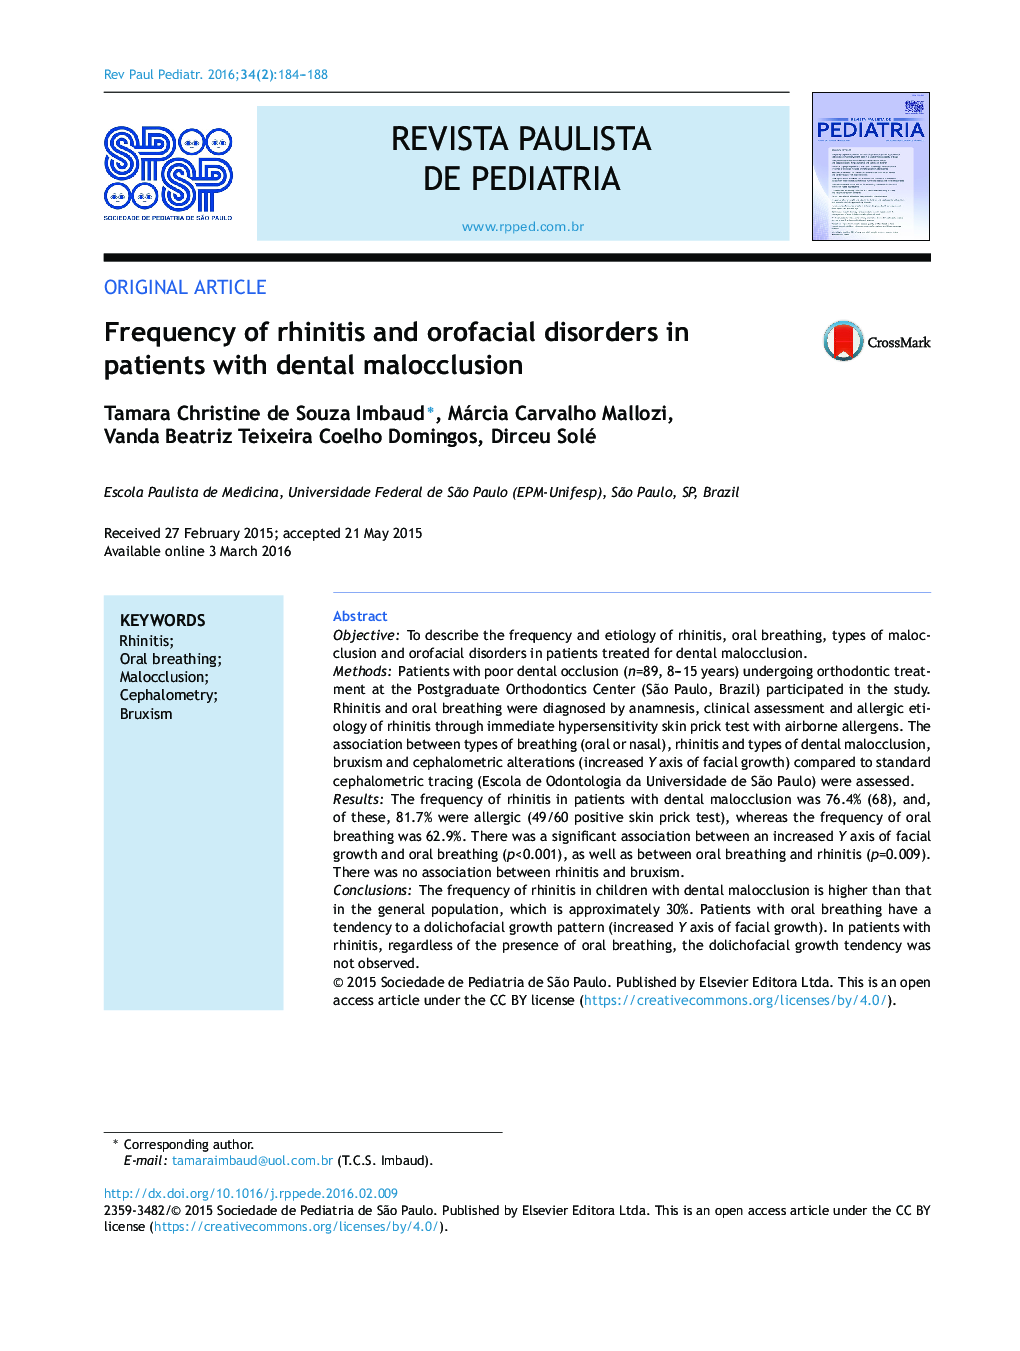 Frequency of rhinitis and orofacial disorders in patients with dental malocclusion